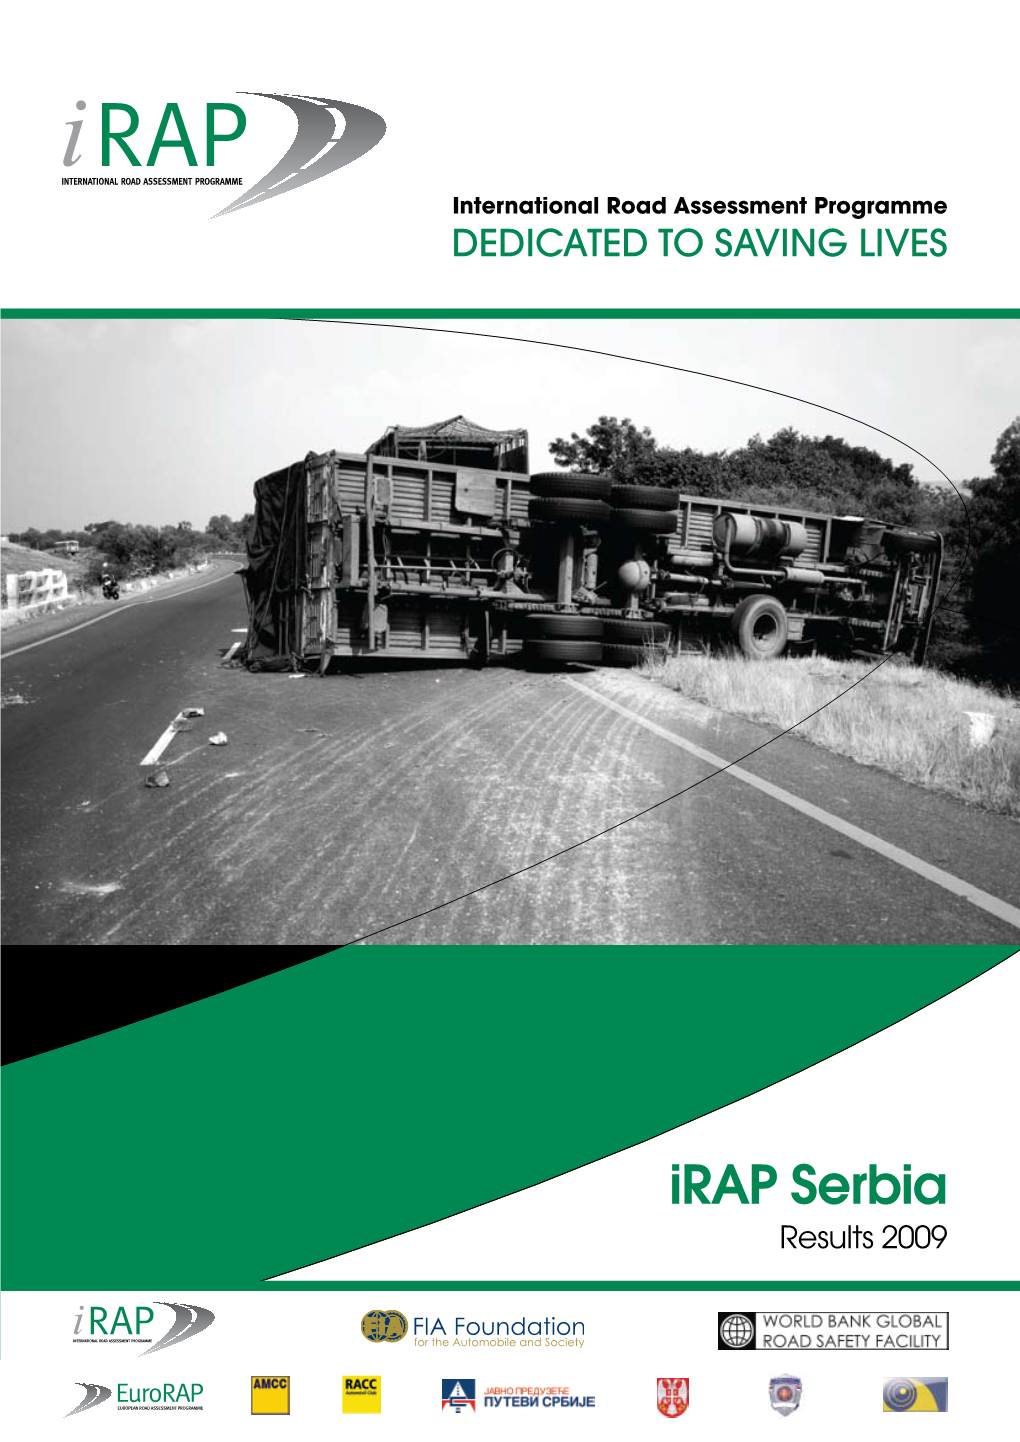 Irap Serbia Results 2009 About Irap: Every Year 1.3 Million People Are Killed and More Than 50 Million People Are Injured Or Disabled in Road Crashes Worldwide